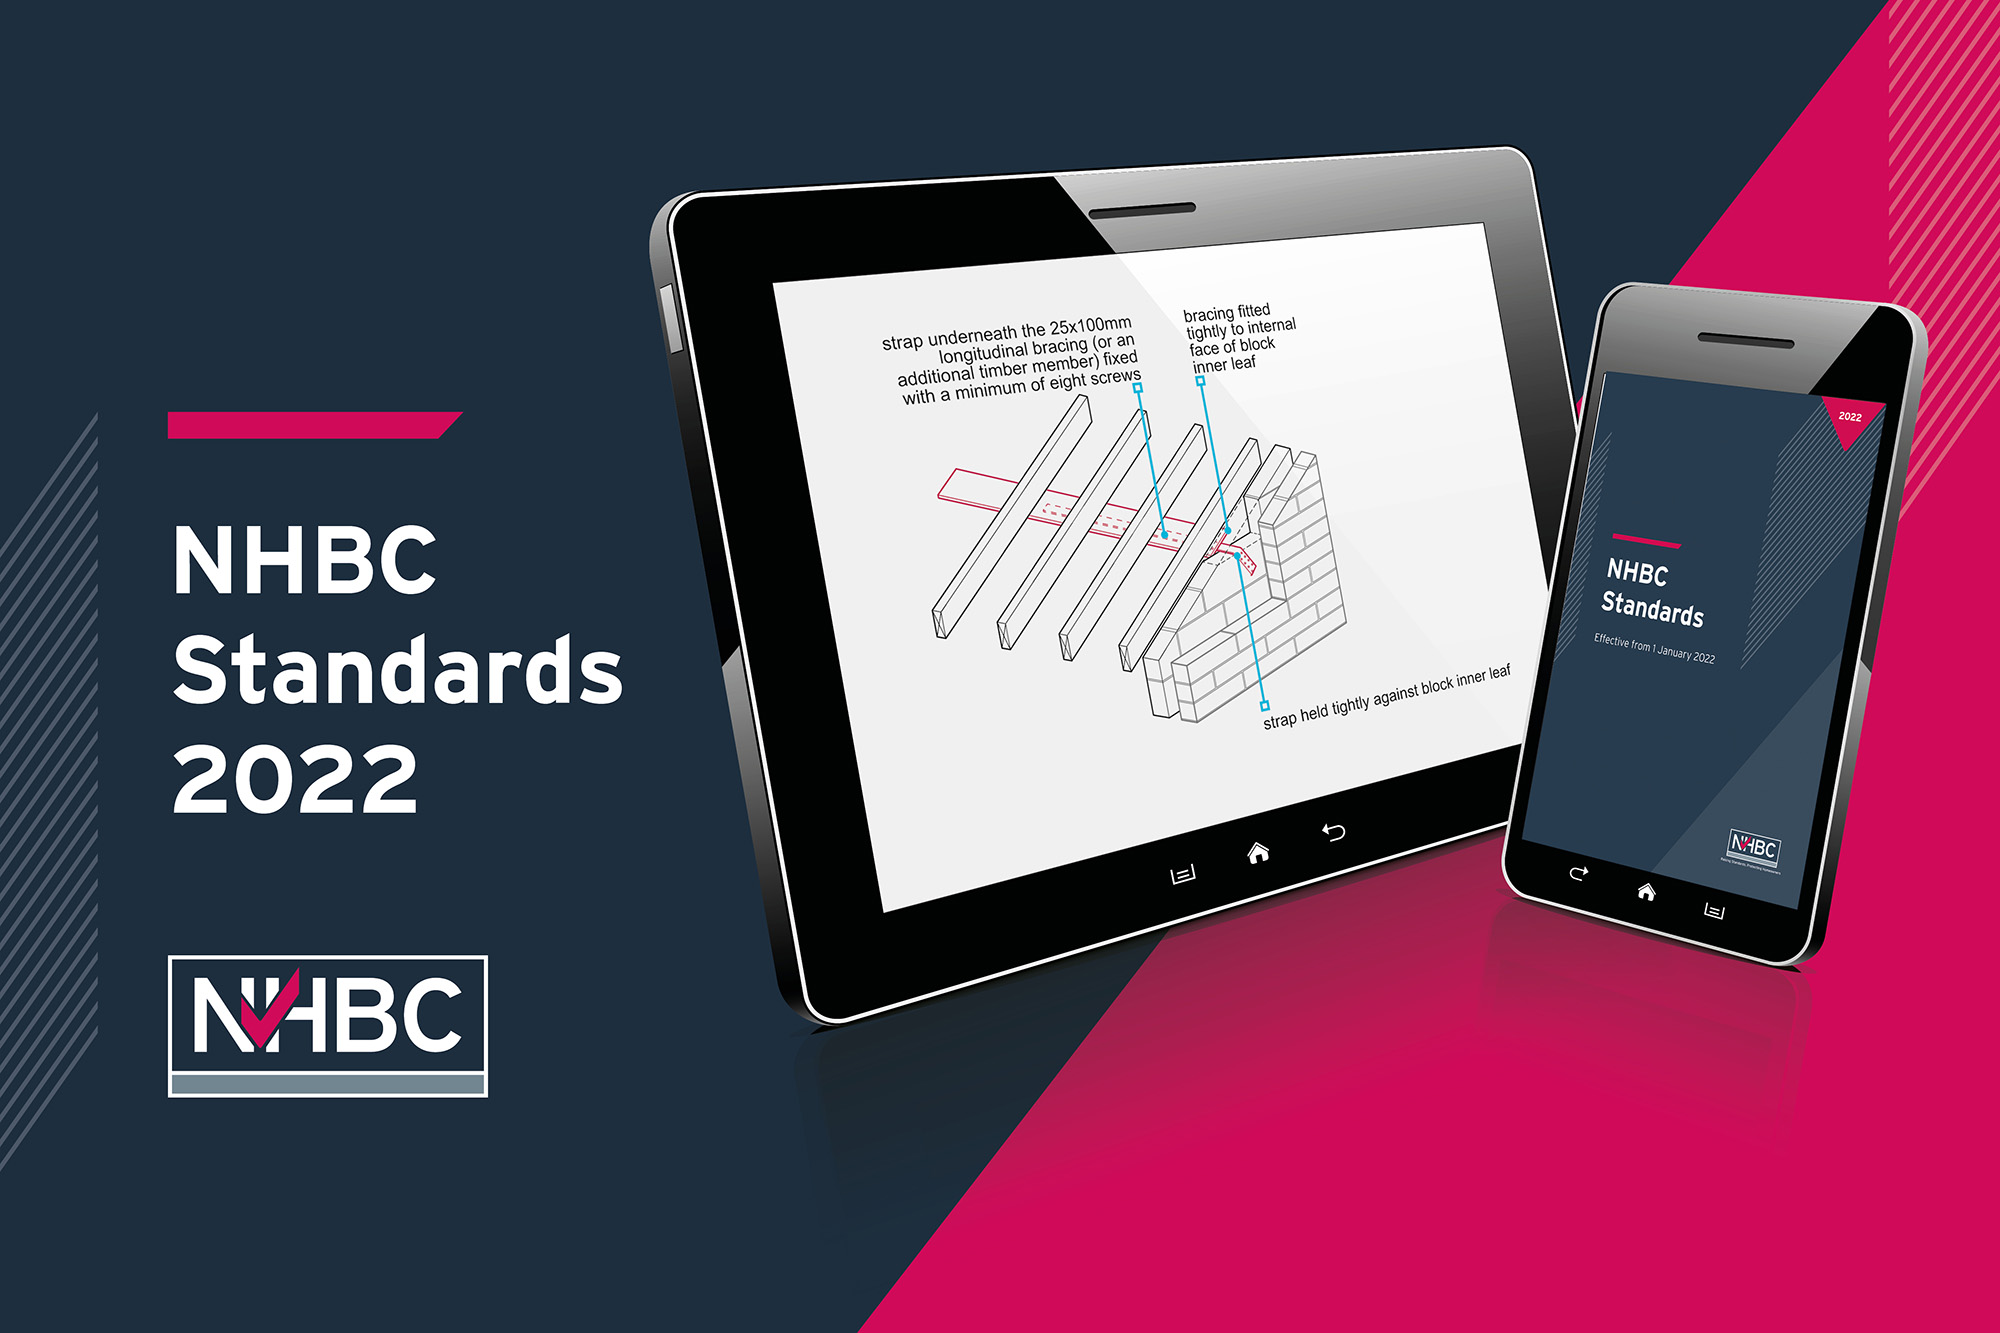 NHBC announces standards for 2022